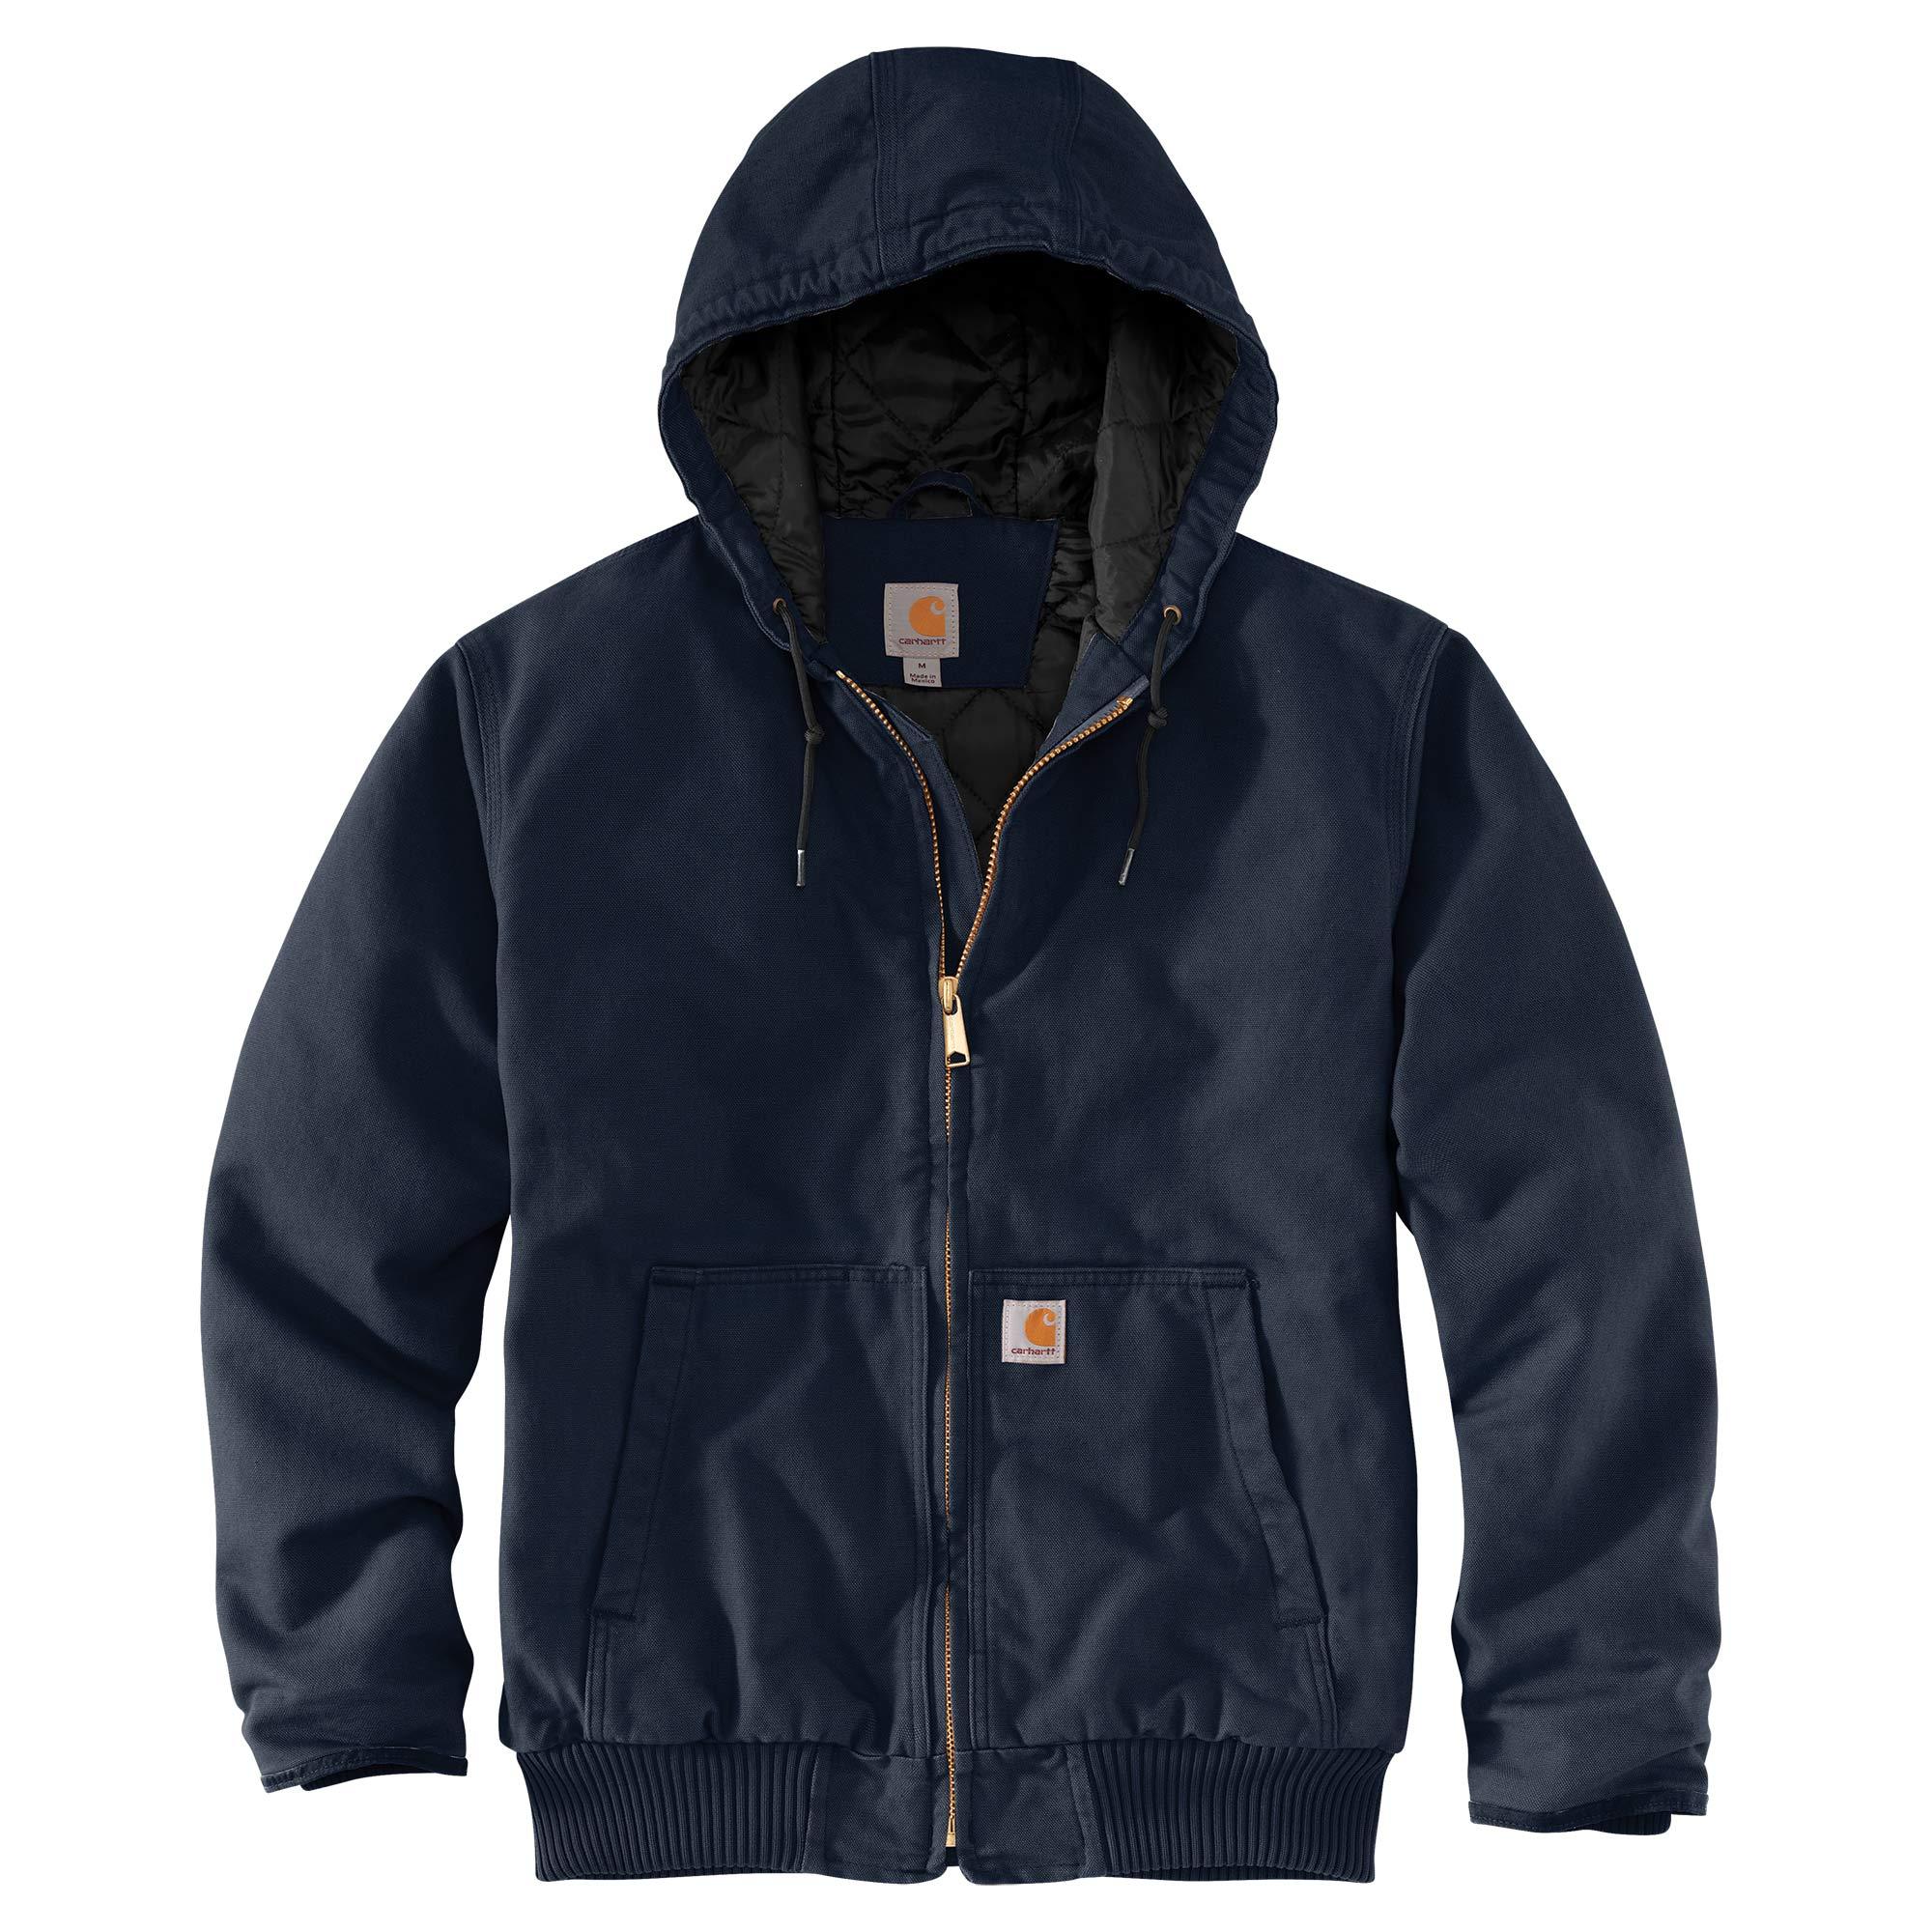 Carhartt 104050 Washed Duck Insulated Active Jacket - Navy | FullSource.com